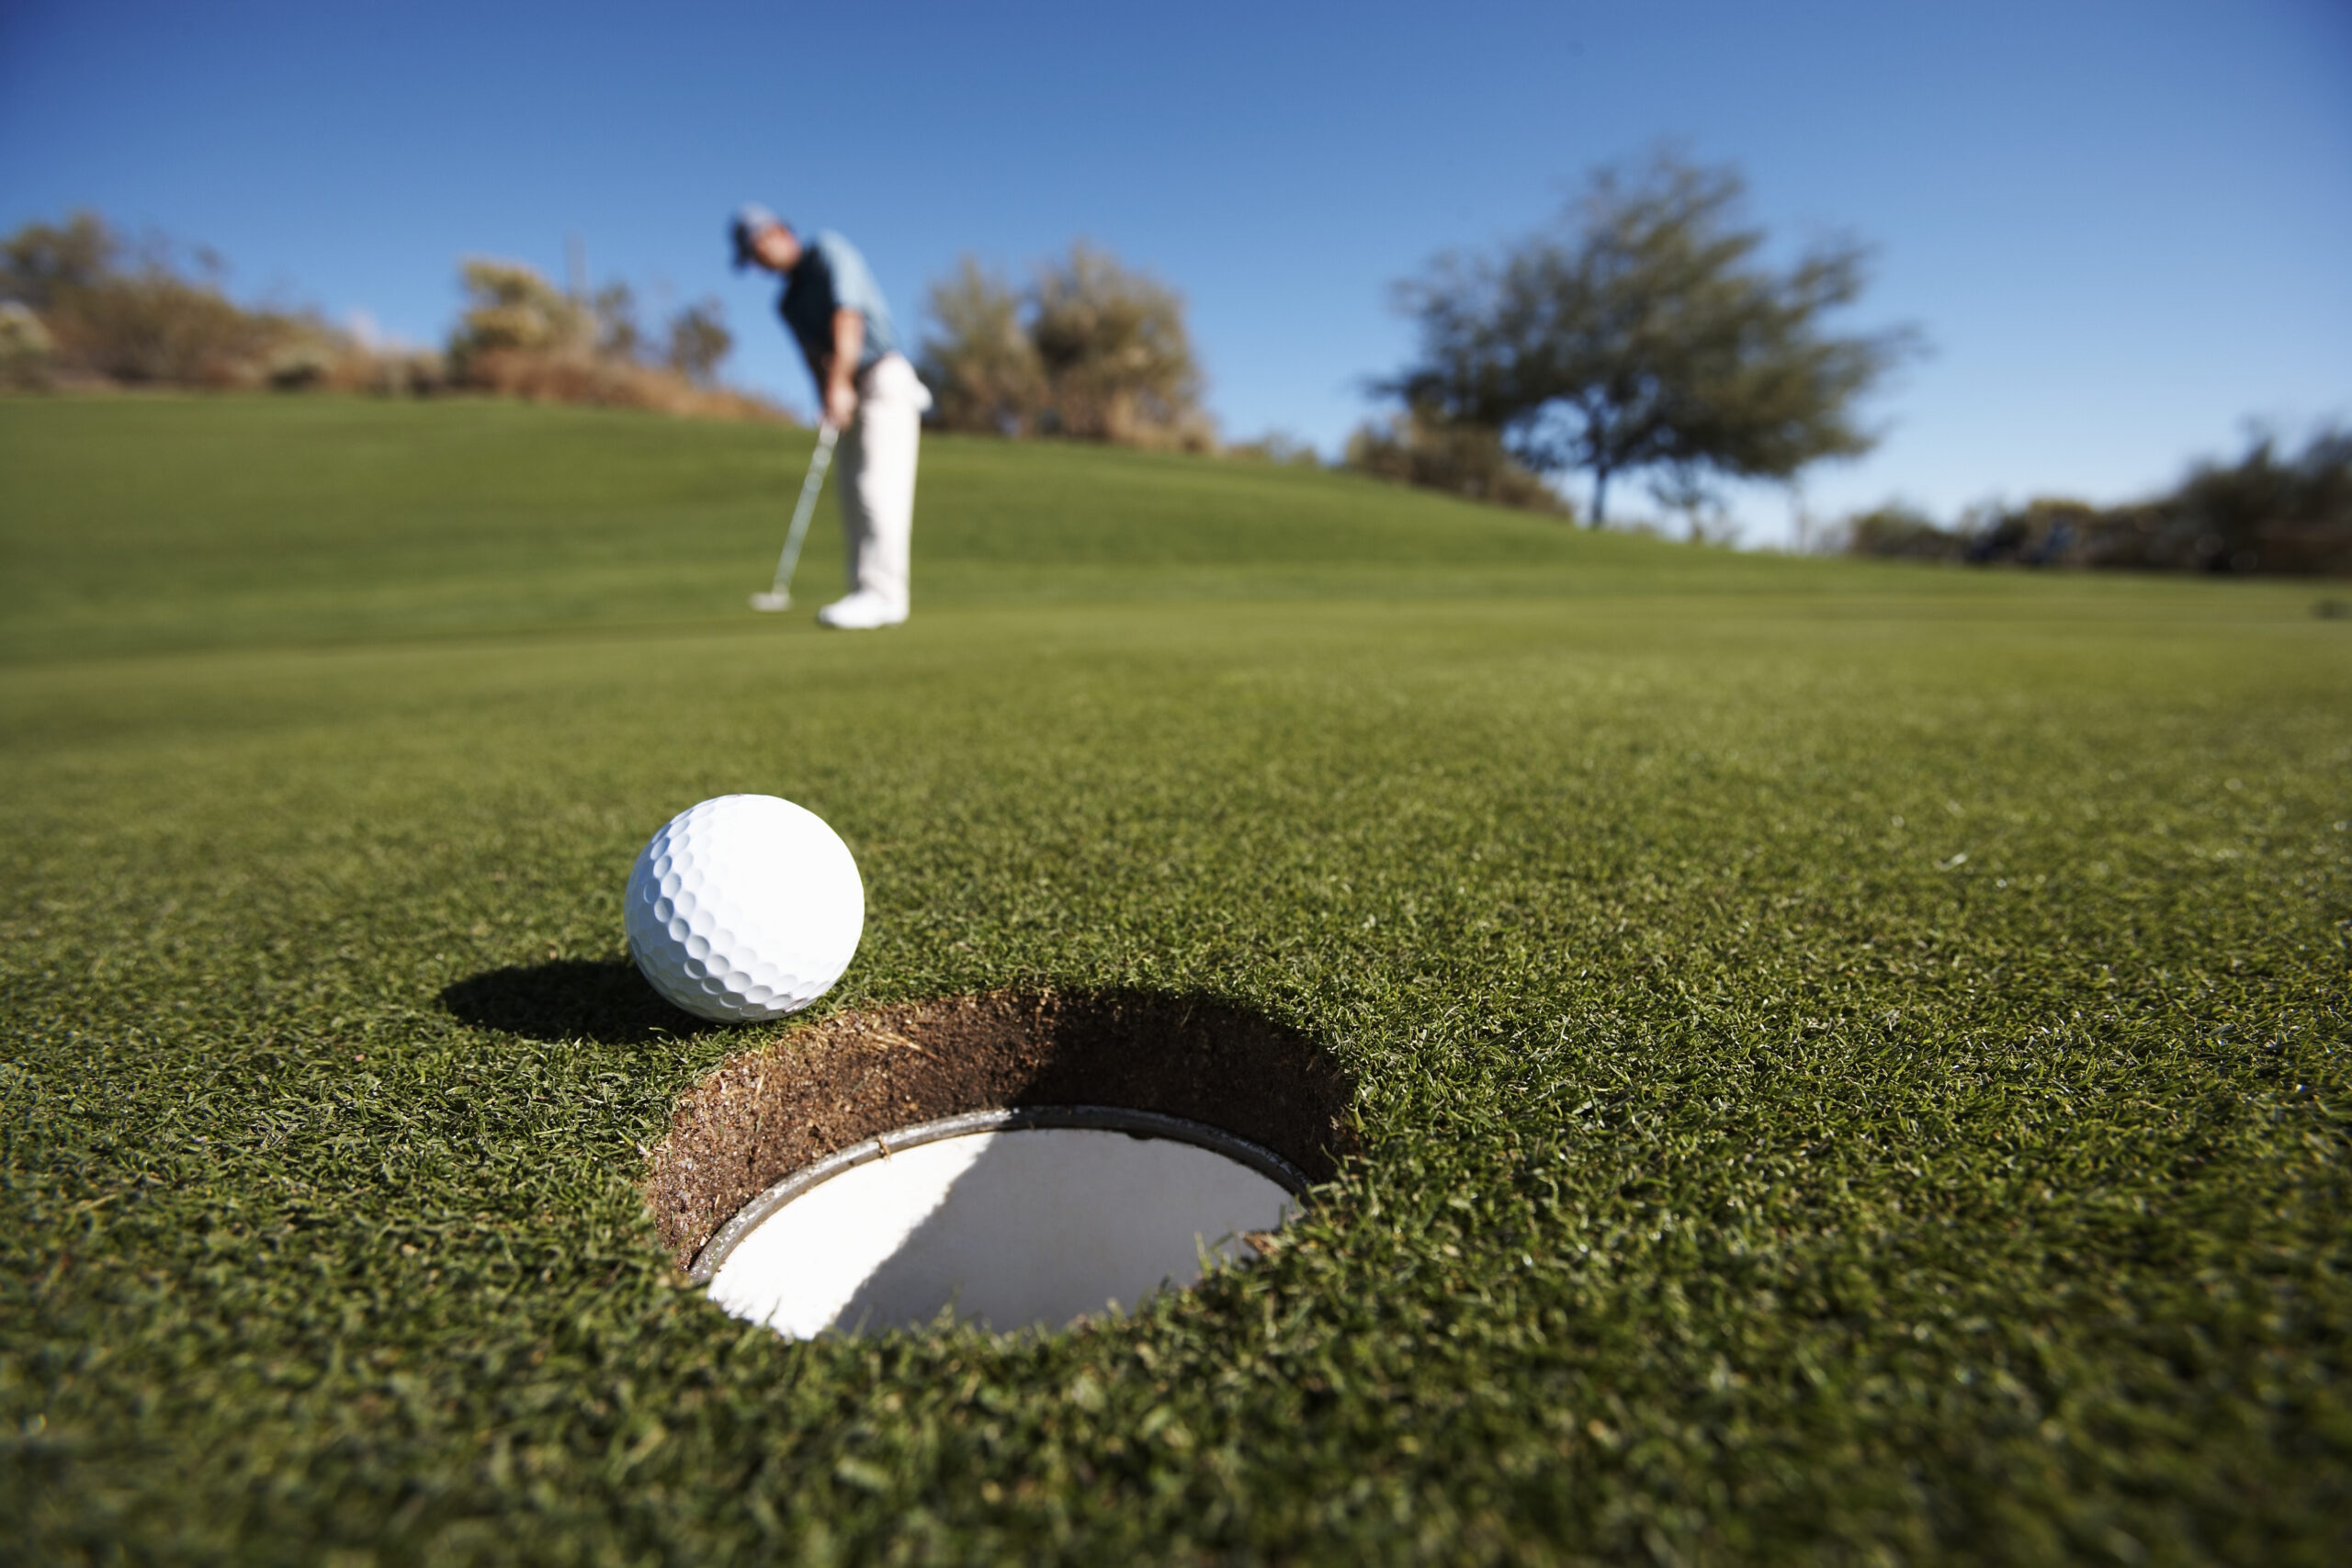 Rumor: Golf courses have 18 holes because 18 shots makes up a bottle of scotch.